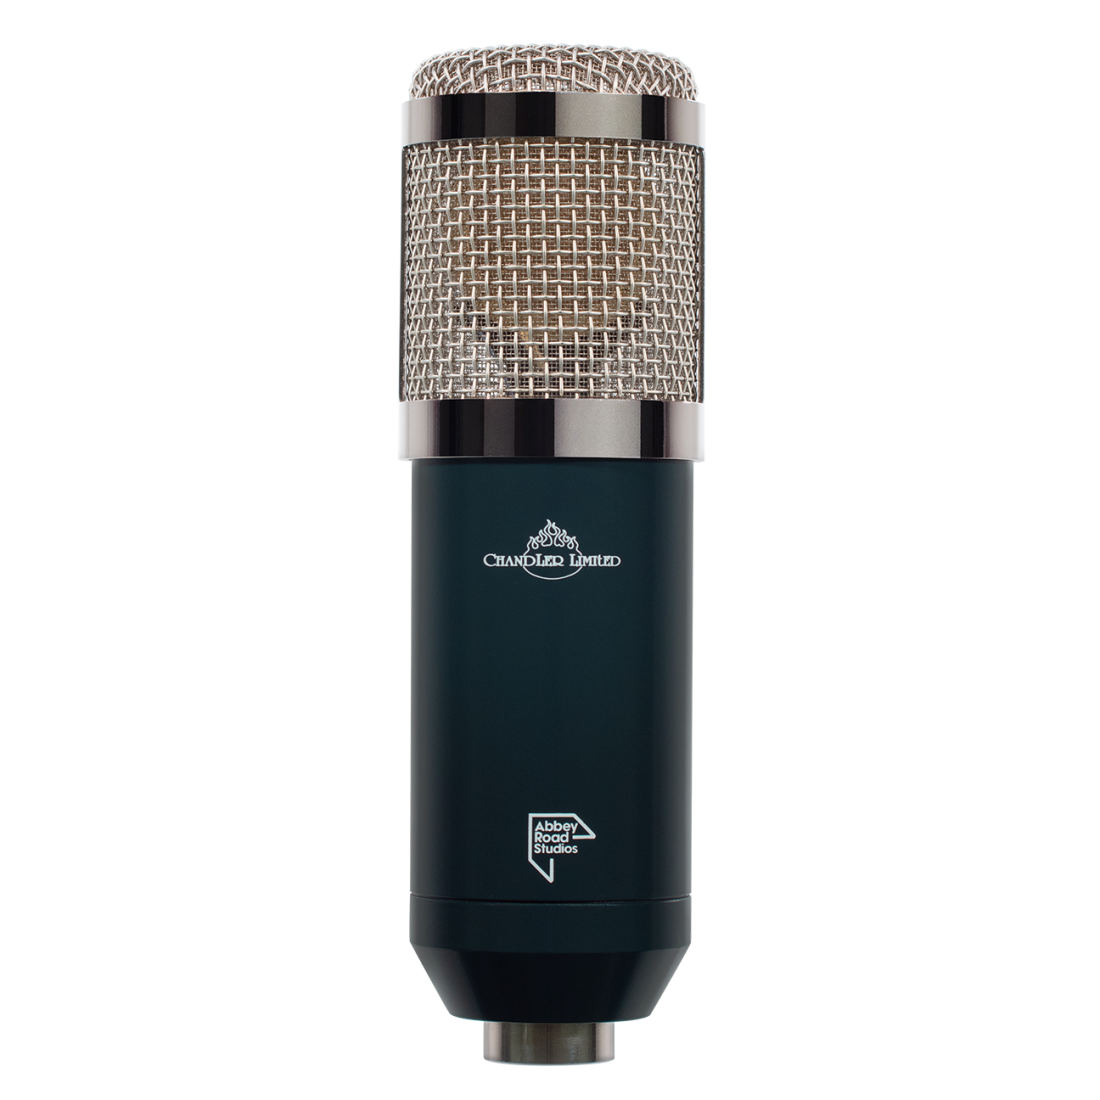 TG Microphone Type L Large Diaphragm Condenser Microphone